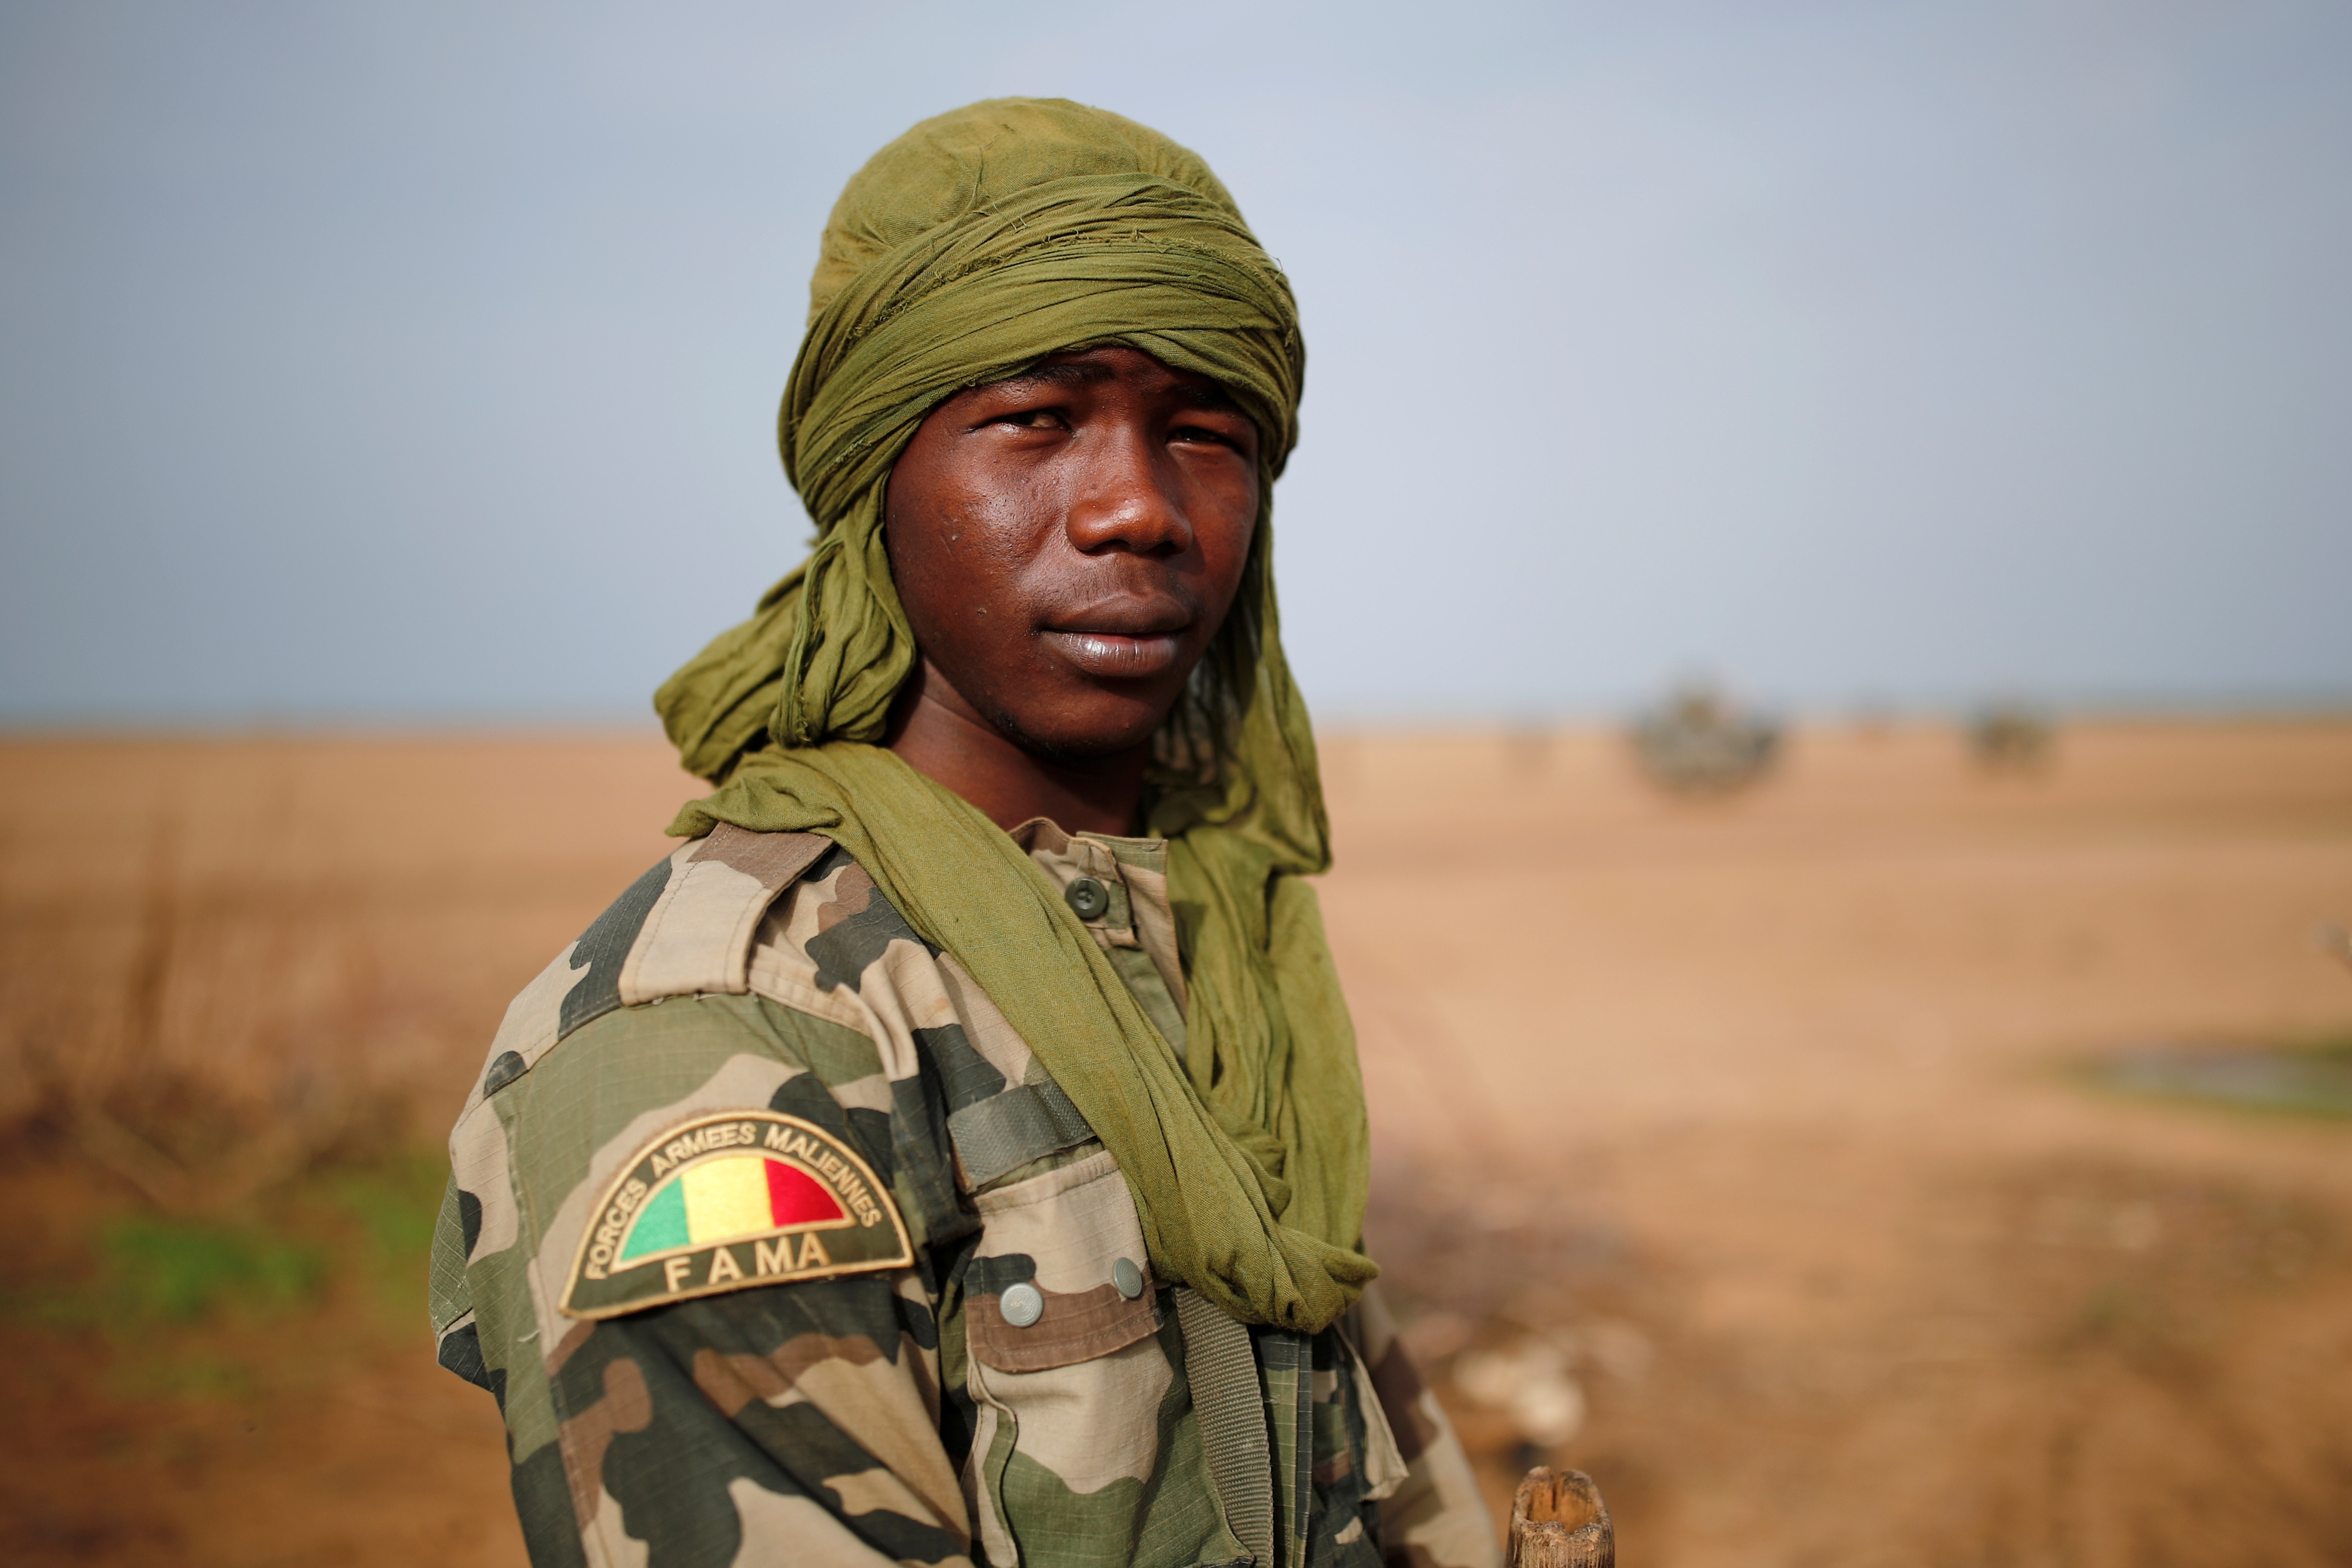 A young Malian Armed Forces (FAMa) soldier poses for a photo during Operation Barkhane in Ndaki, Mali, July 29, 2019. REUTERS/Benoit Tessier SEARCH "TESSIER MALI" FOR THIS STORY. SEARCH "WIDER IMAGE" FOR ALL STORIES. - RC1676B9B8C0